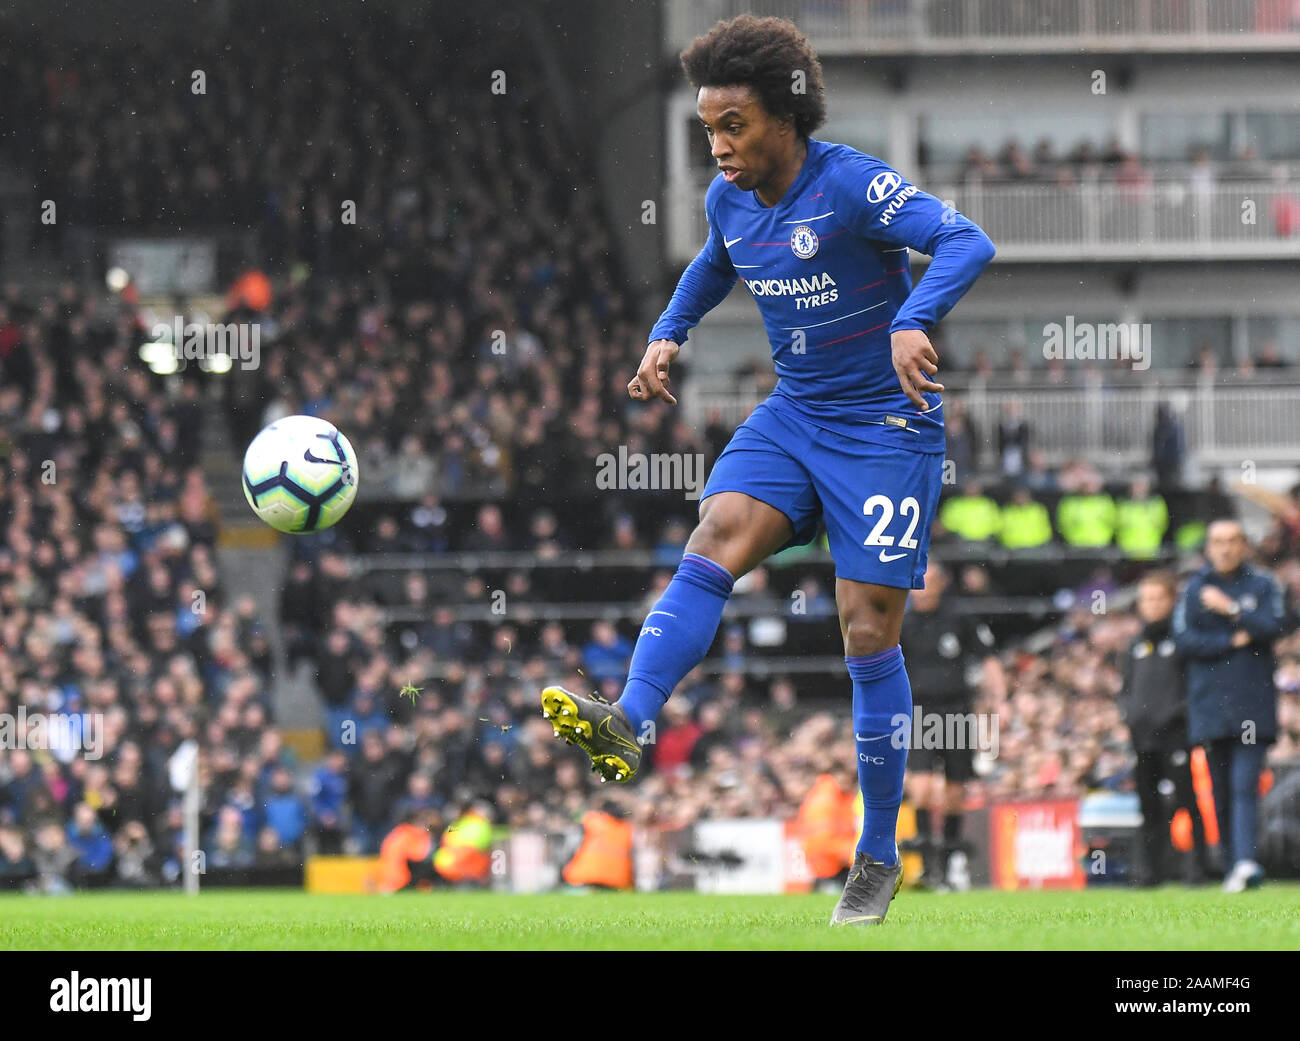 LONDON, ENGLAND - MARCH 3, 2019: Willian Borges da Silva of Chelsea pictured during the 2018/19 Premier League game between Fulham FC and Chelsea FC at Craven Cottage. Stock Photo